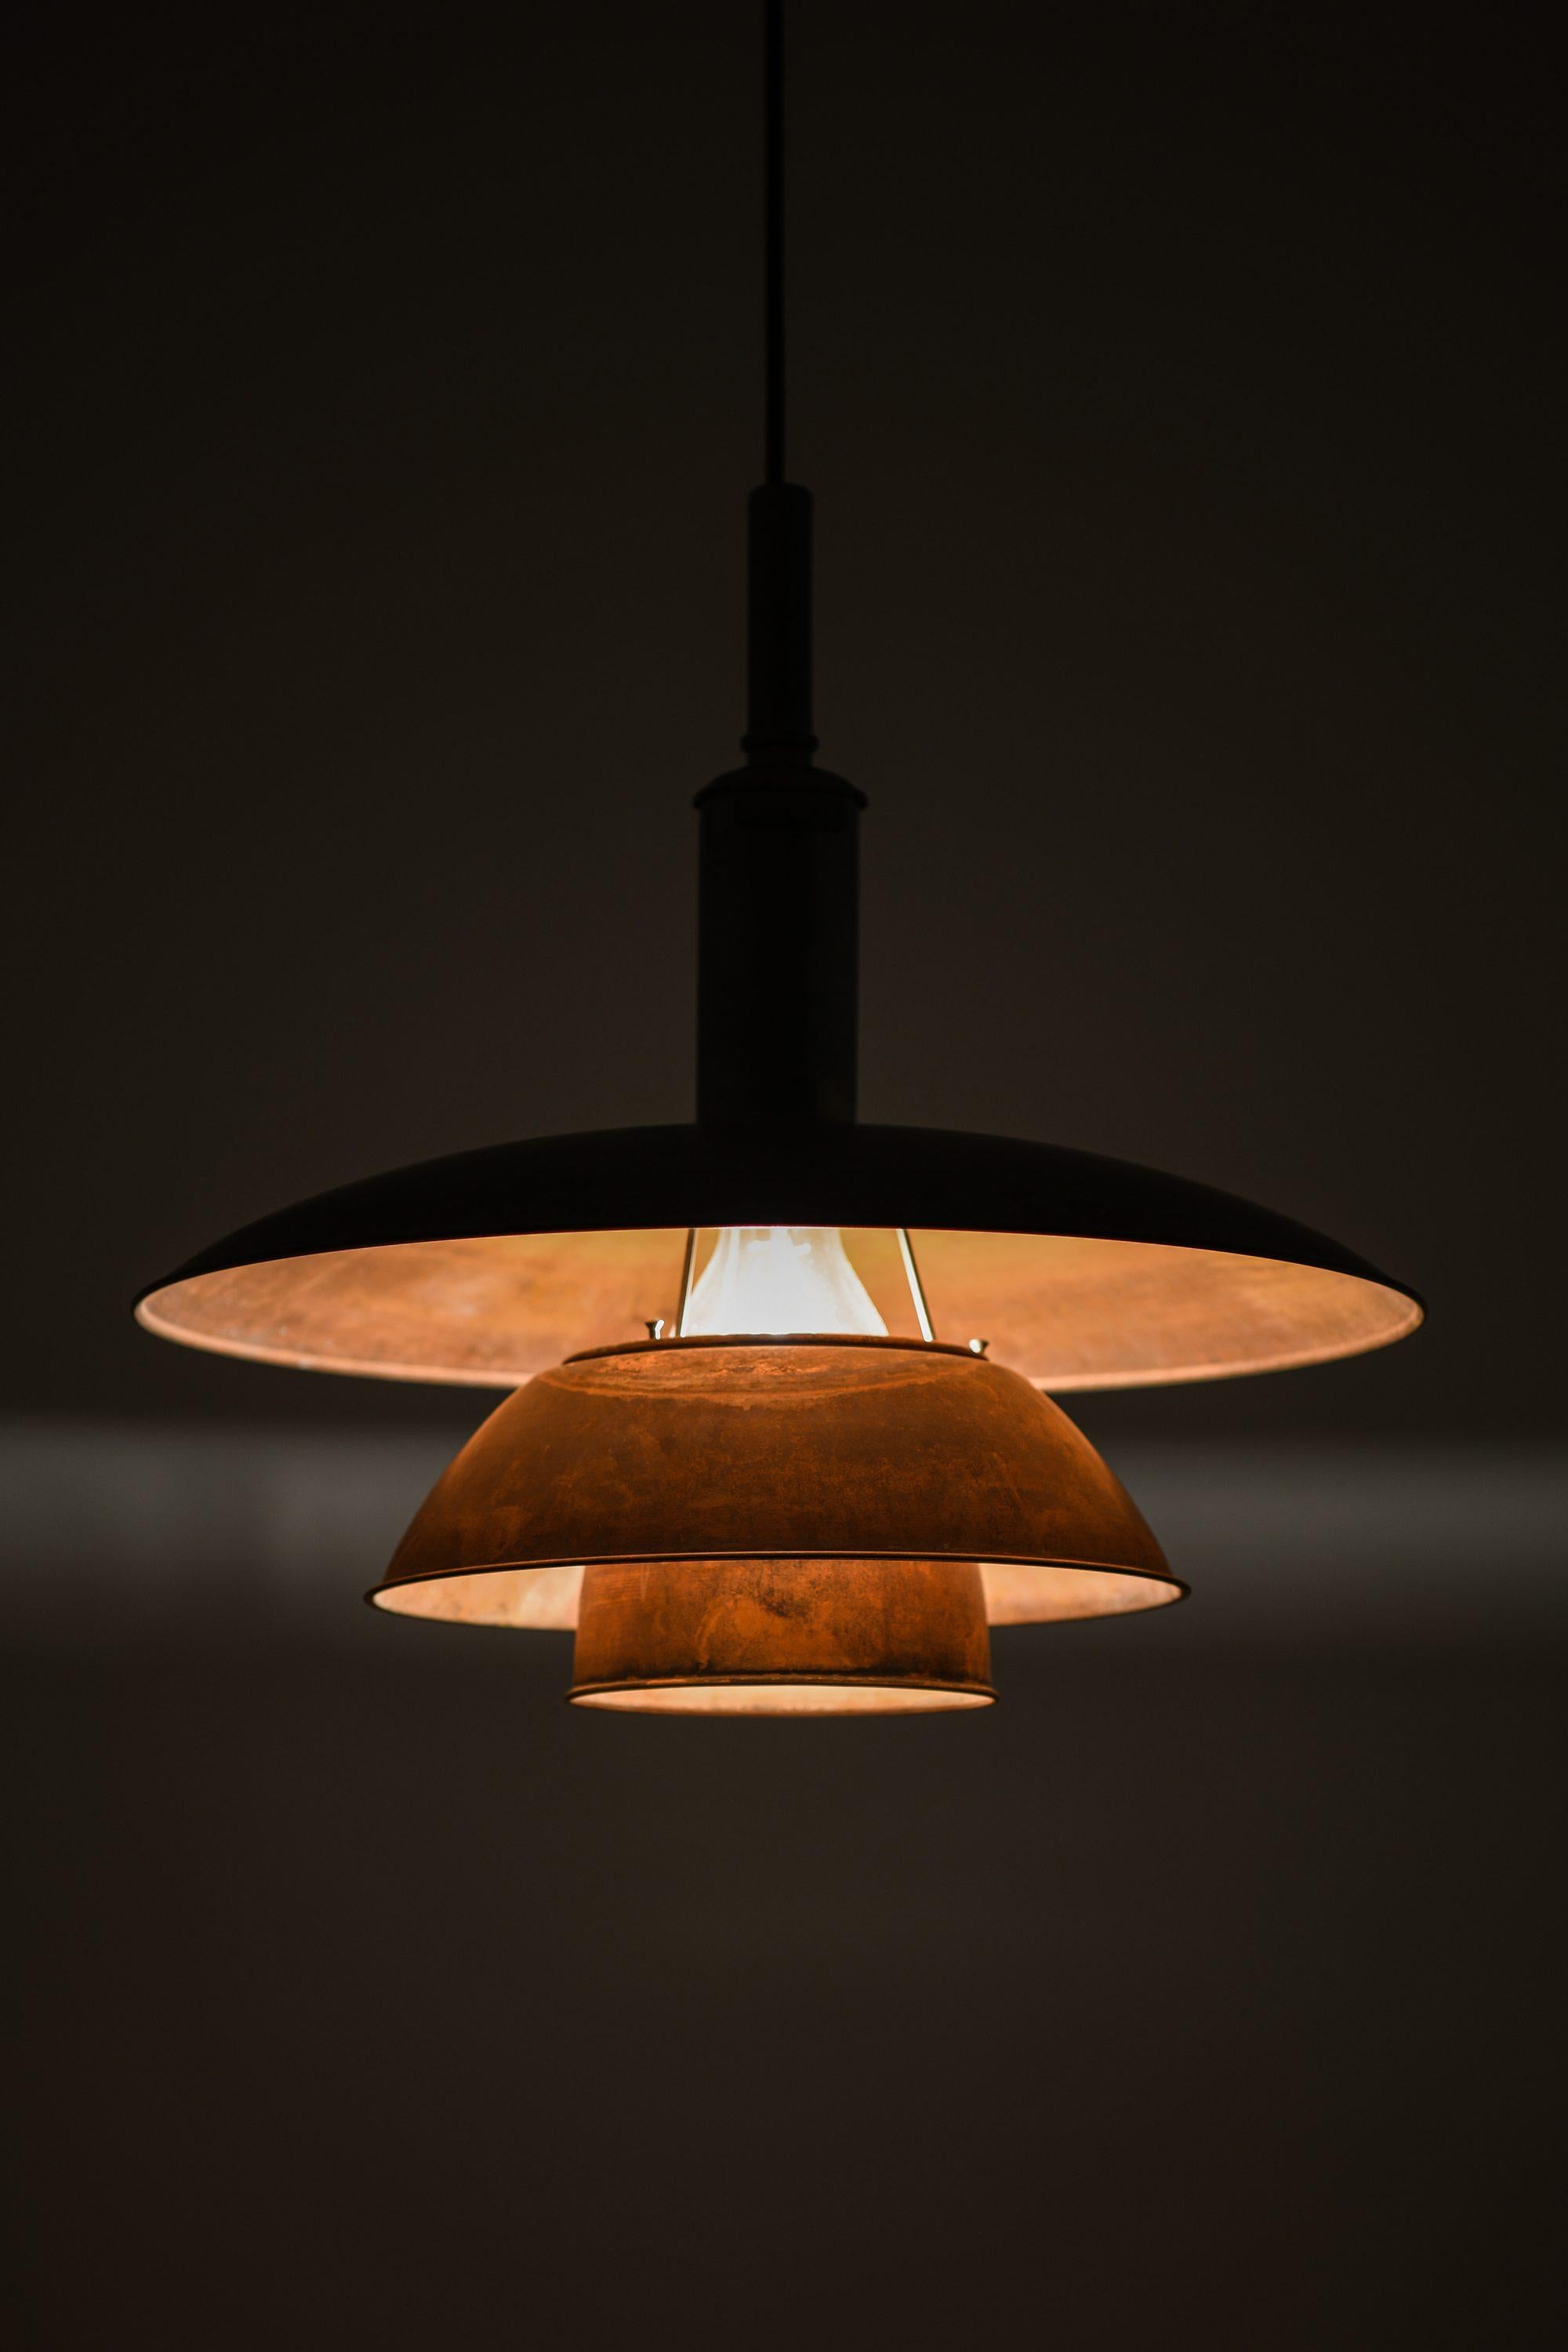 20th Century Ceiling Lamp in Copper and Nickel Plated Steel by Poul Henningsen, 1920's For Sale